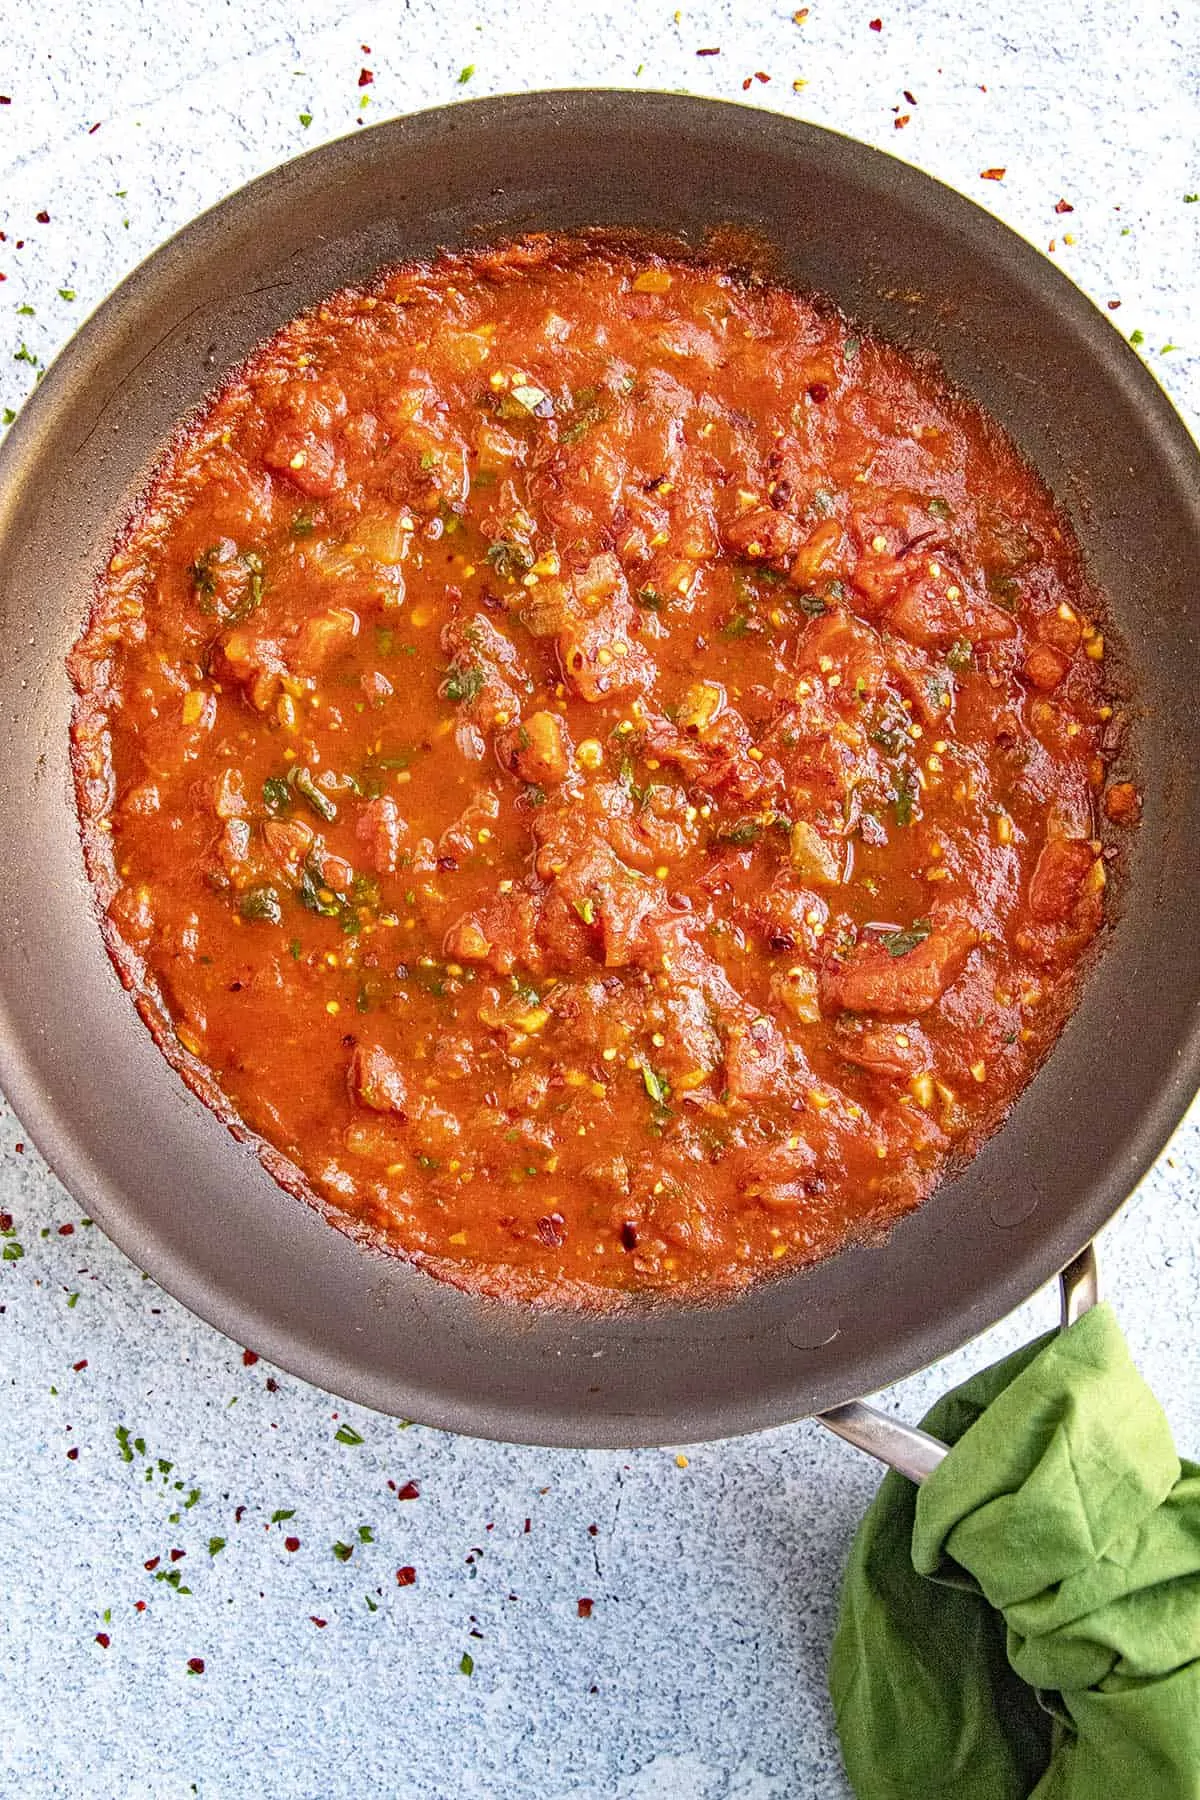 Spicy Italian Fra Diavolo Sauce in a hot pan, ready to serve